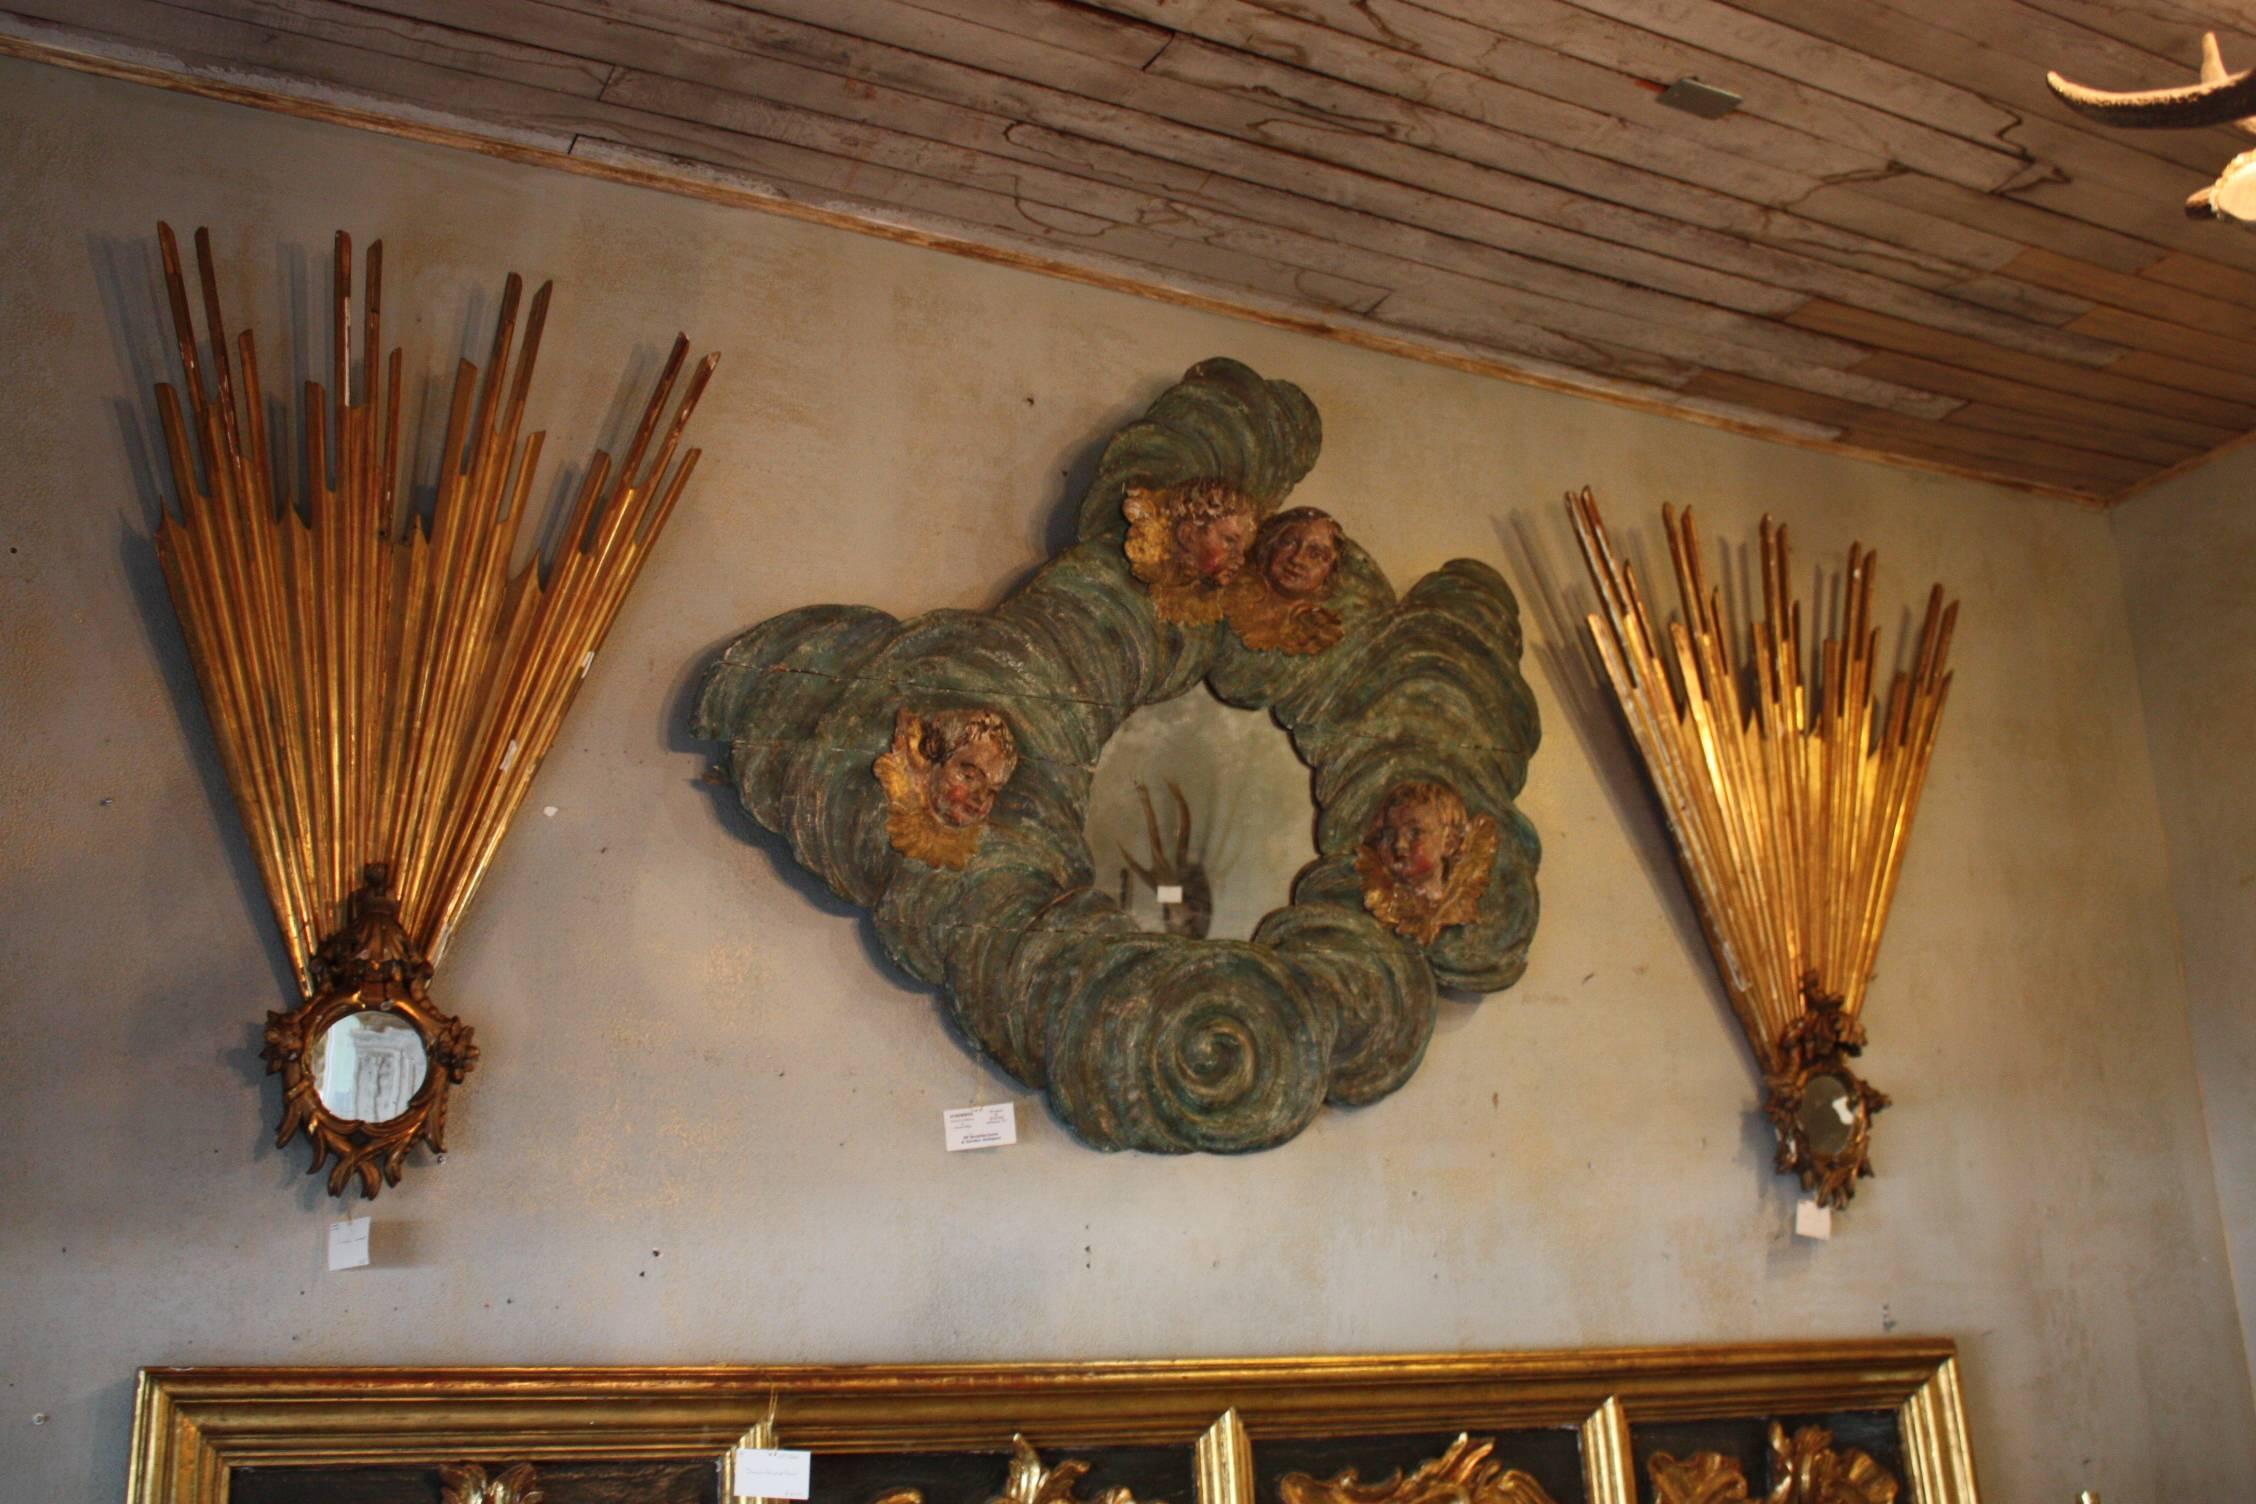 This pair of antique Italian architectural elements from a church in Italy are such a statement. These would be beautiful to display flanking another piece of art as we have displayed in image, or a fireplace on two opposing walls.